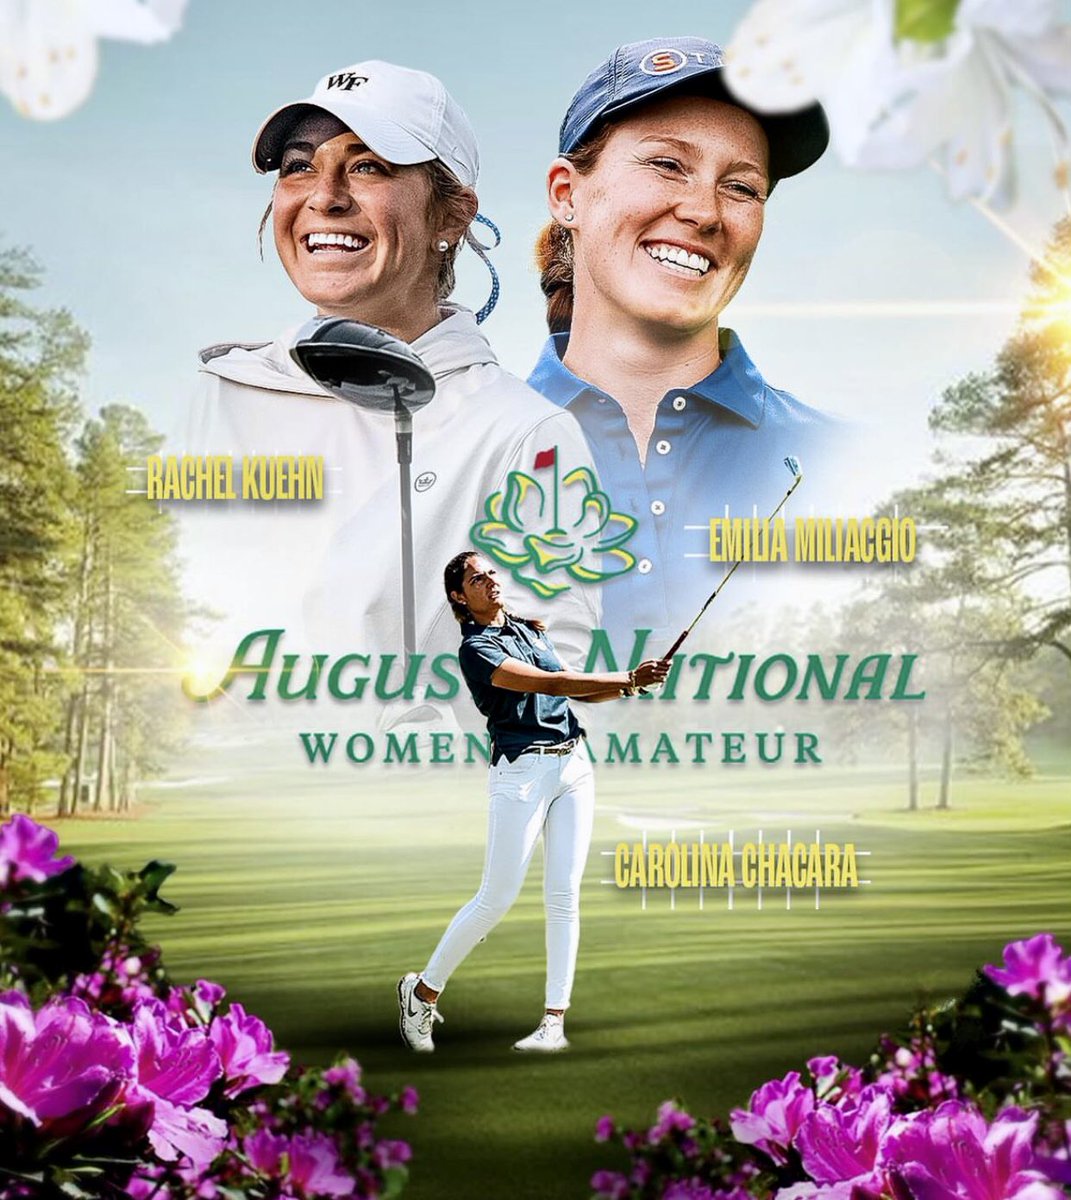 Congrats and best of luck to @NBCSports @emiliamigliacc1 @carolchacarra and @rachel_kuehn_ @anwagolf this week! @WakeWGolf @NCAA⛳️🏆 @WakeWGolf